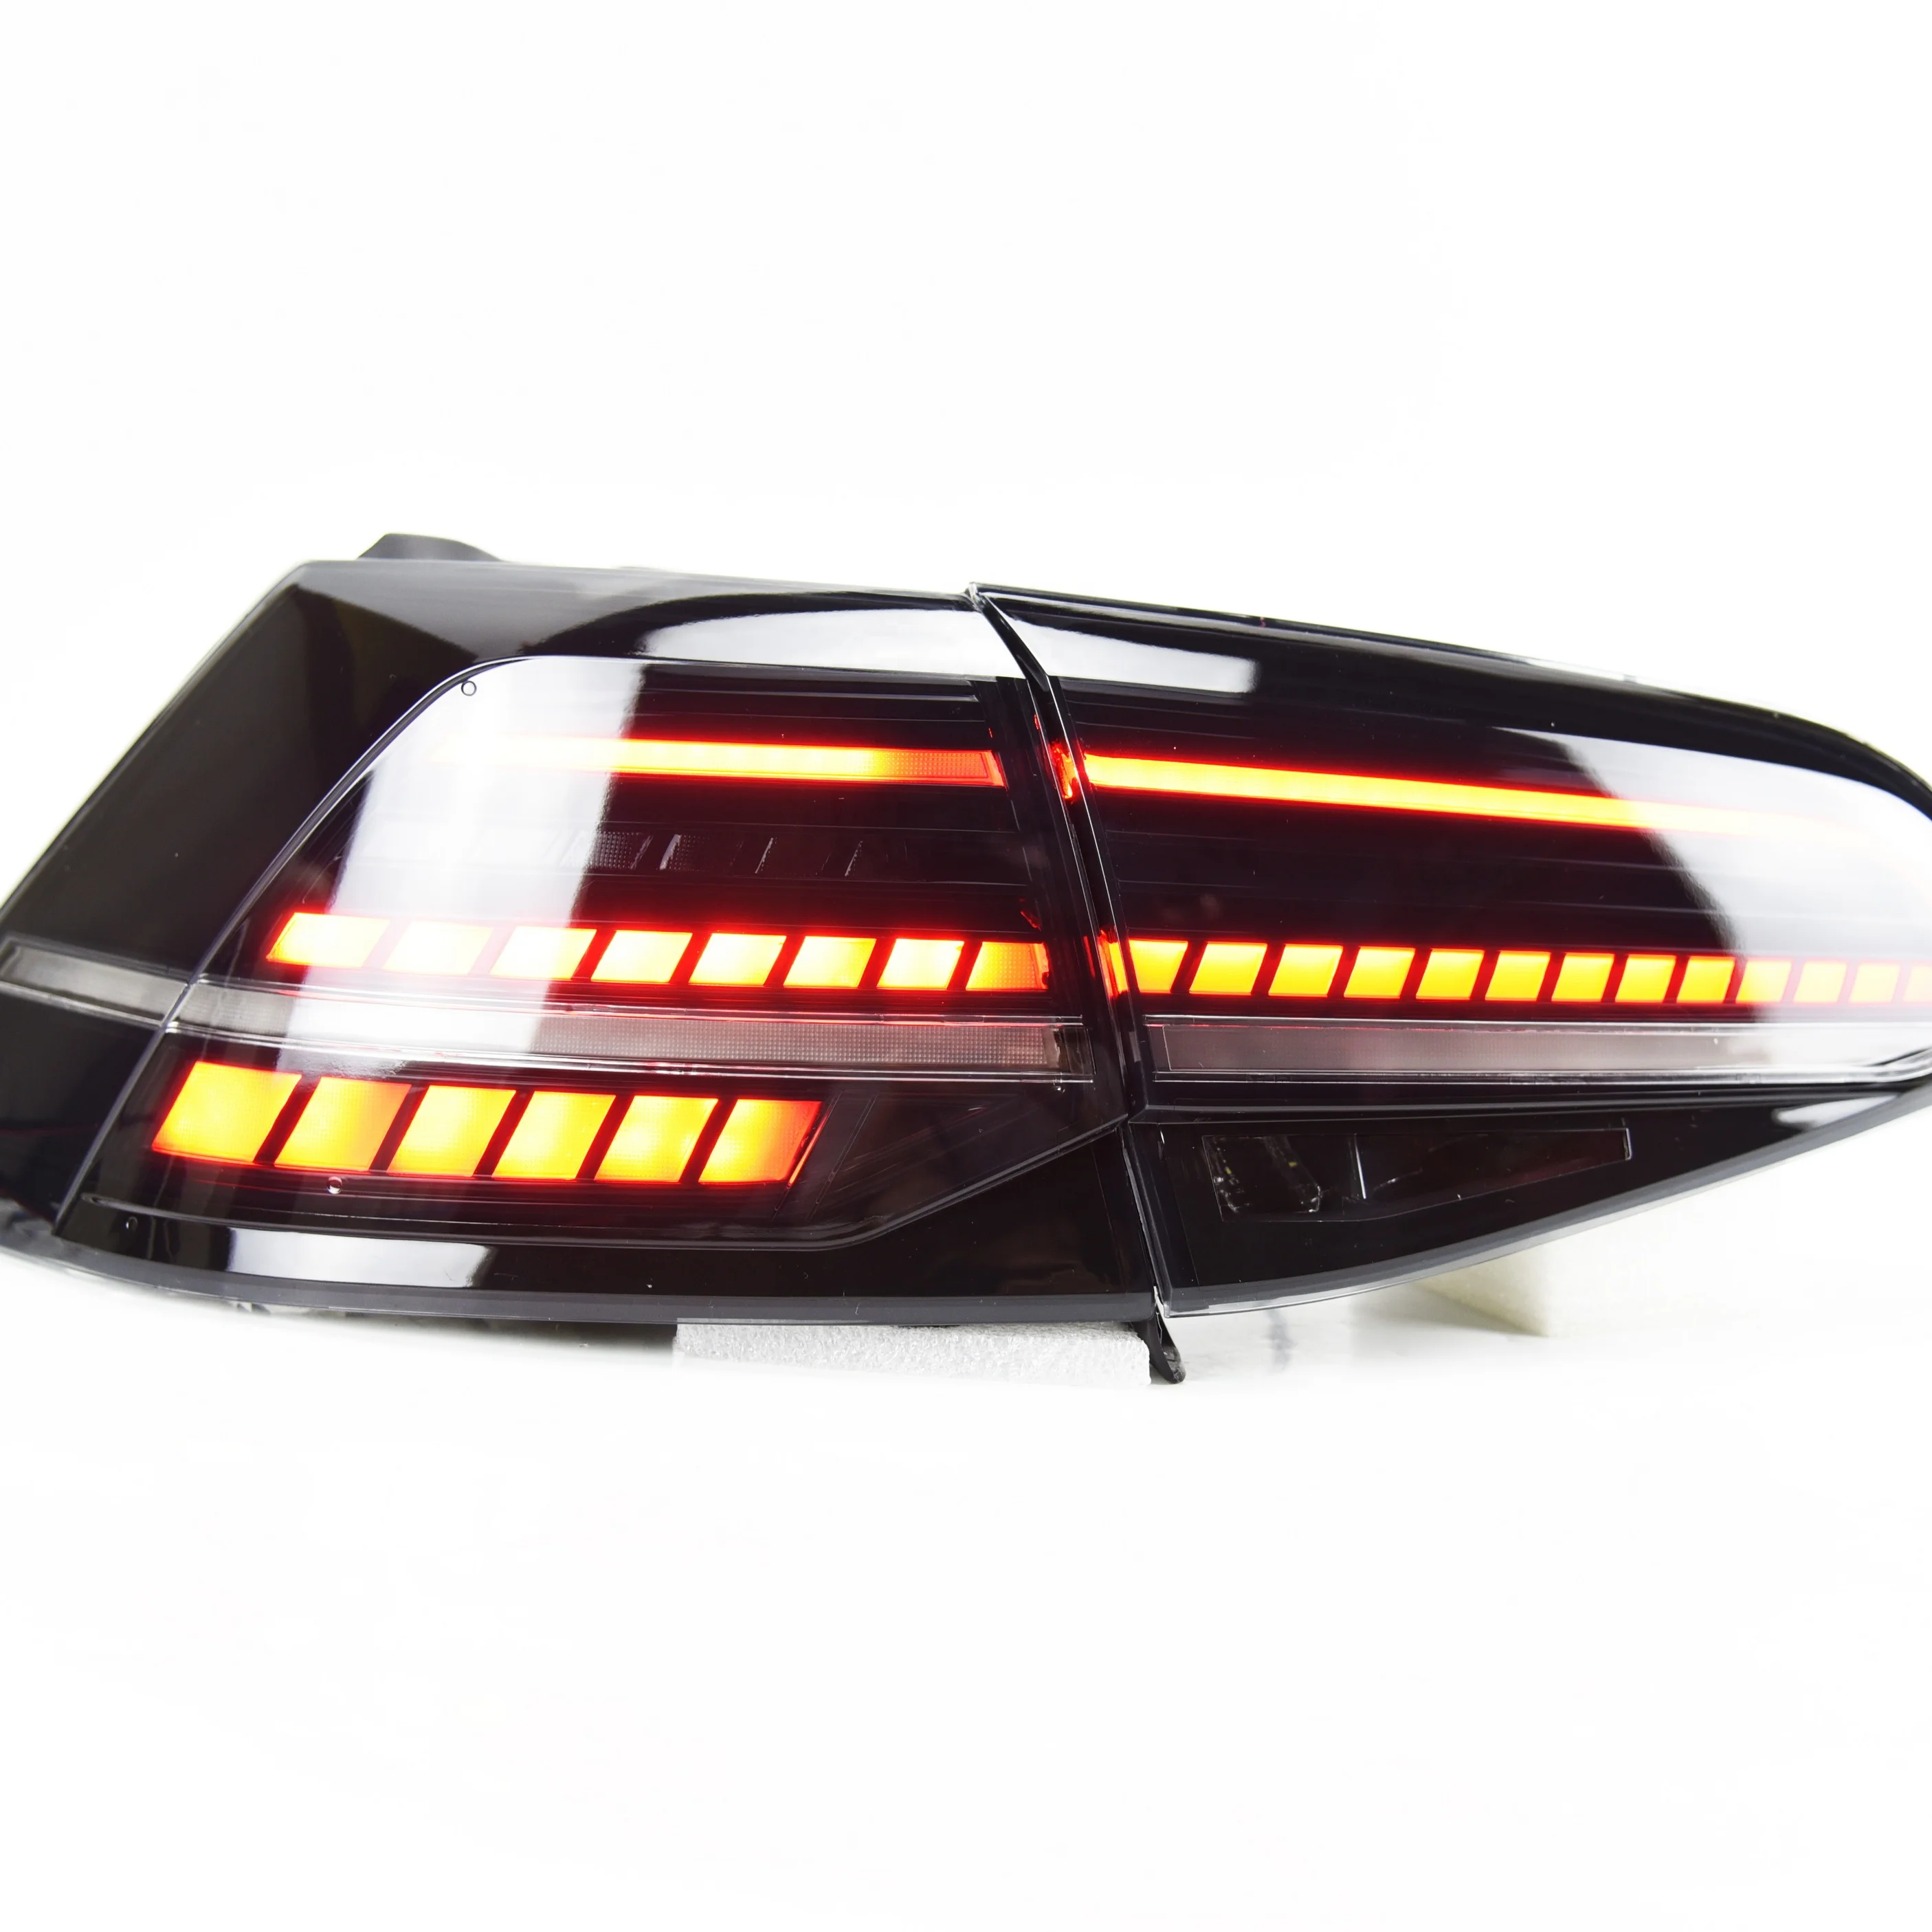 

Car Styling Tail Lamp for VW Golf 7 2013-2017 Golf7 Mk7 Taillight Rear Lamp DRL Dynamic Signal Brake Auto Accessories